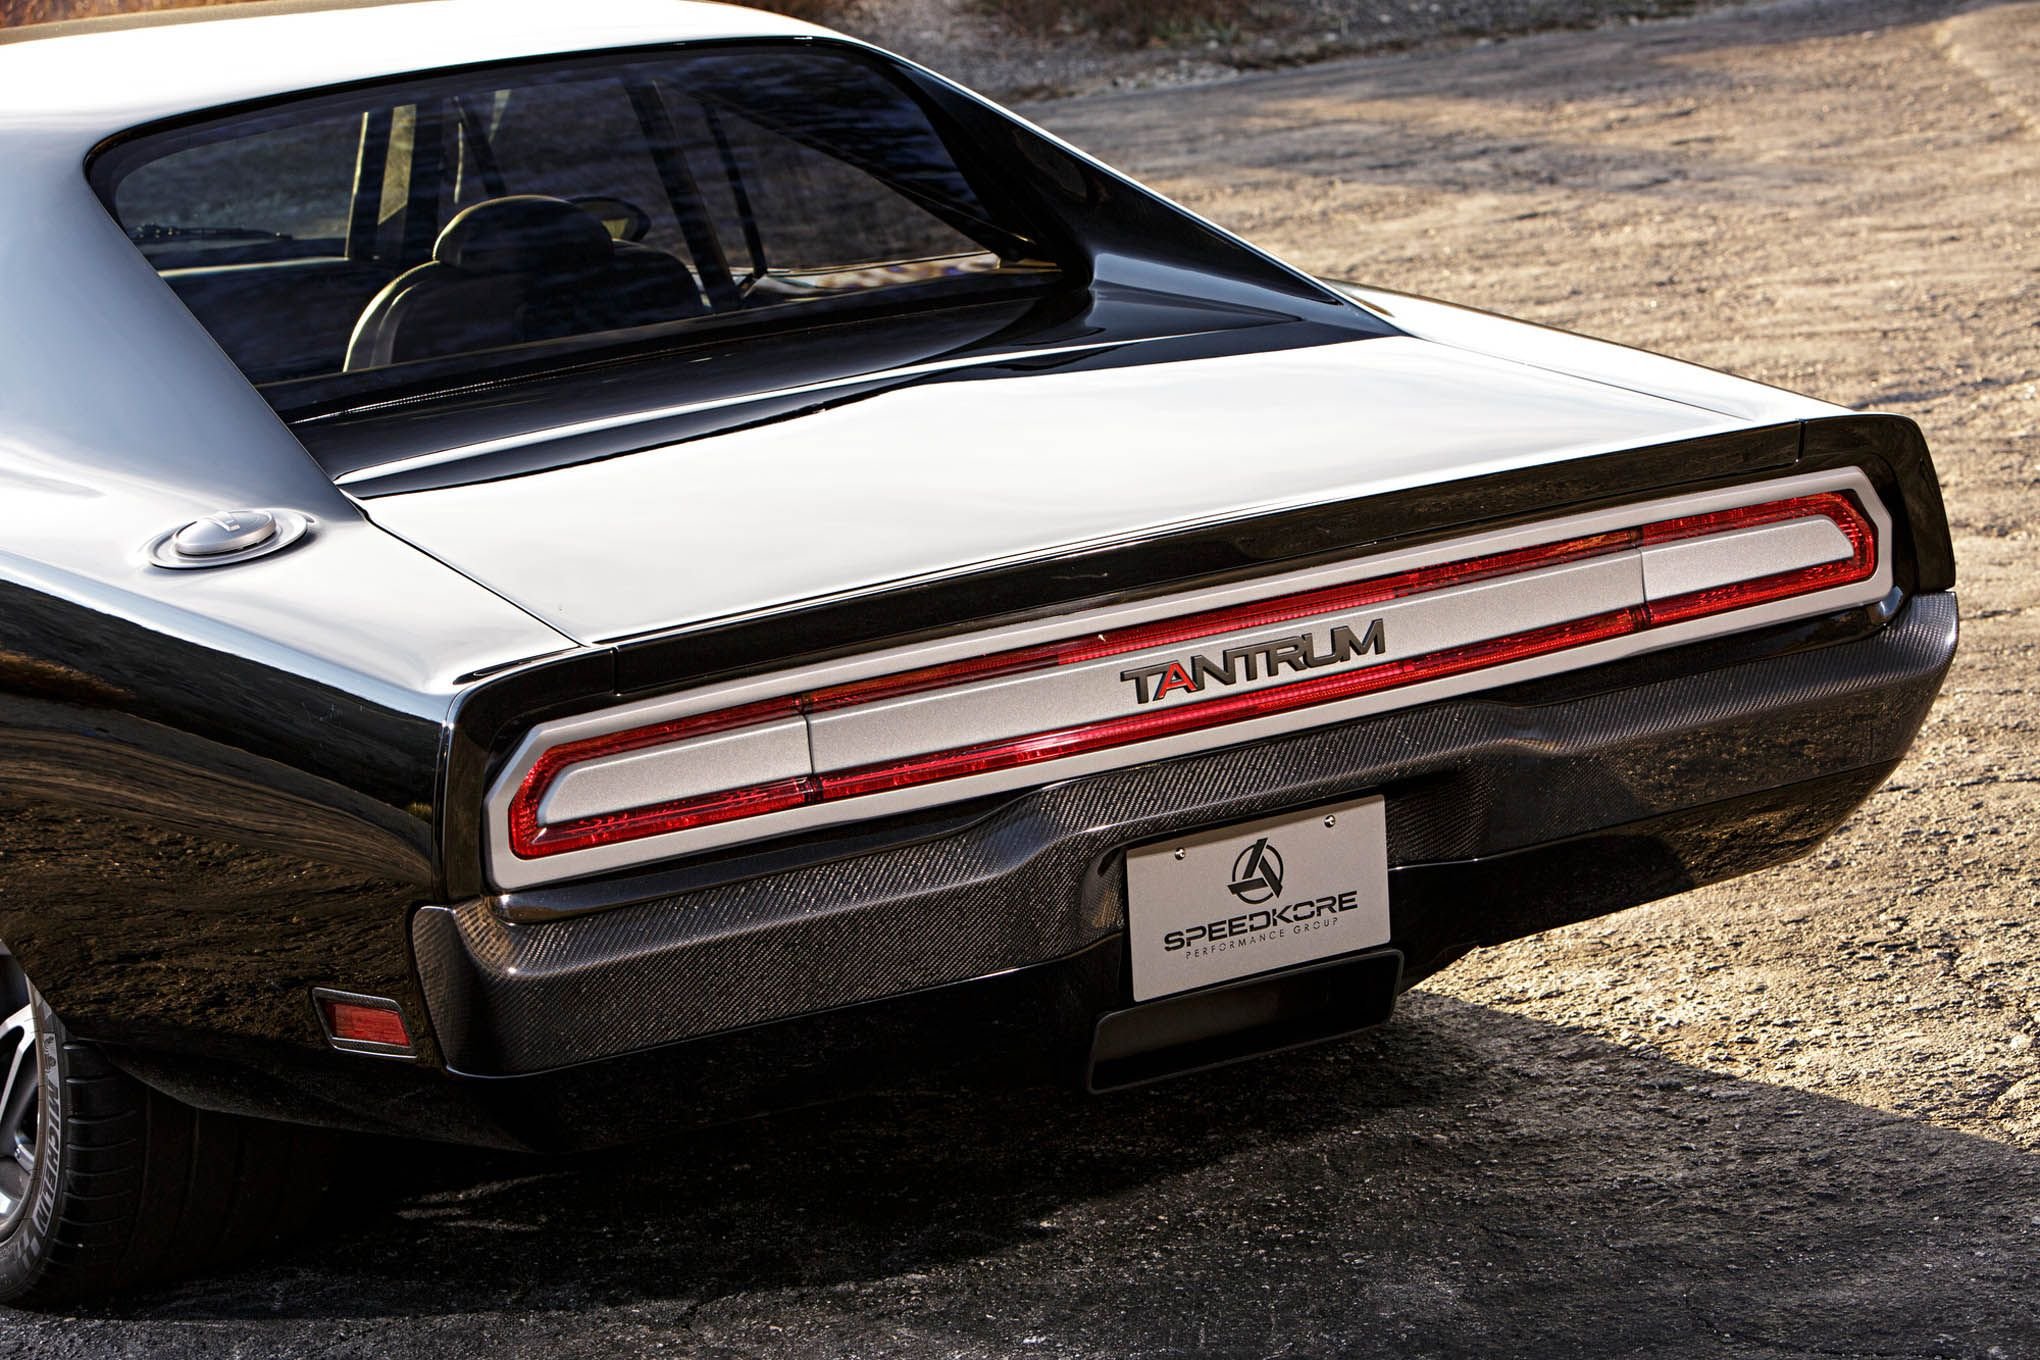 1969, Dodge, Chager, Tantrum, Pro, Touring, Super, Charged, Low, Street, Usa,  08 Wallpaper